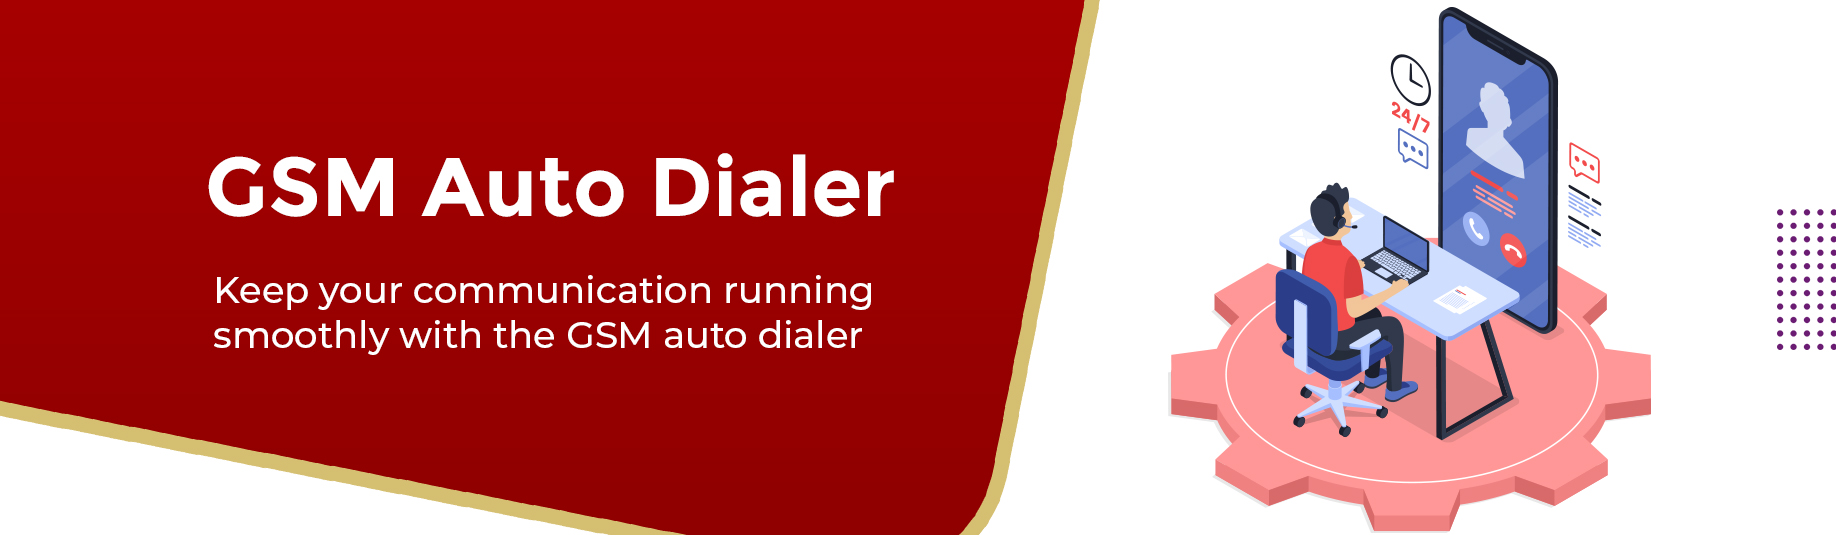 Stay connected with the Gsm Auto Dialer, perfect for emergency notifications and mass communication